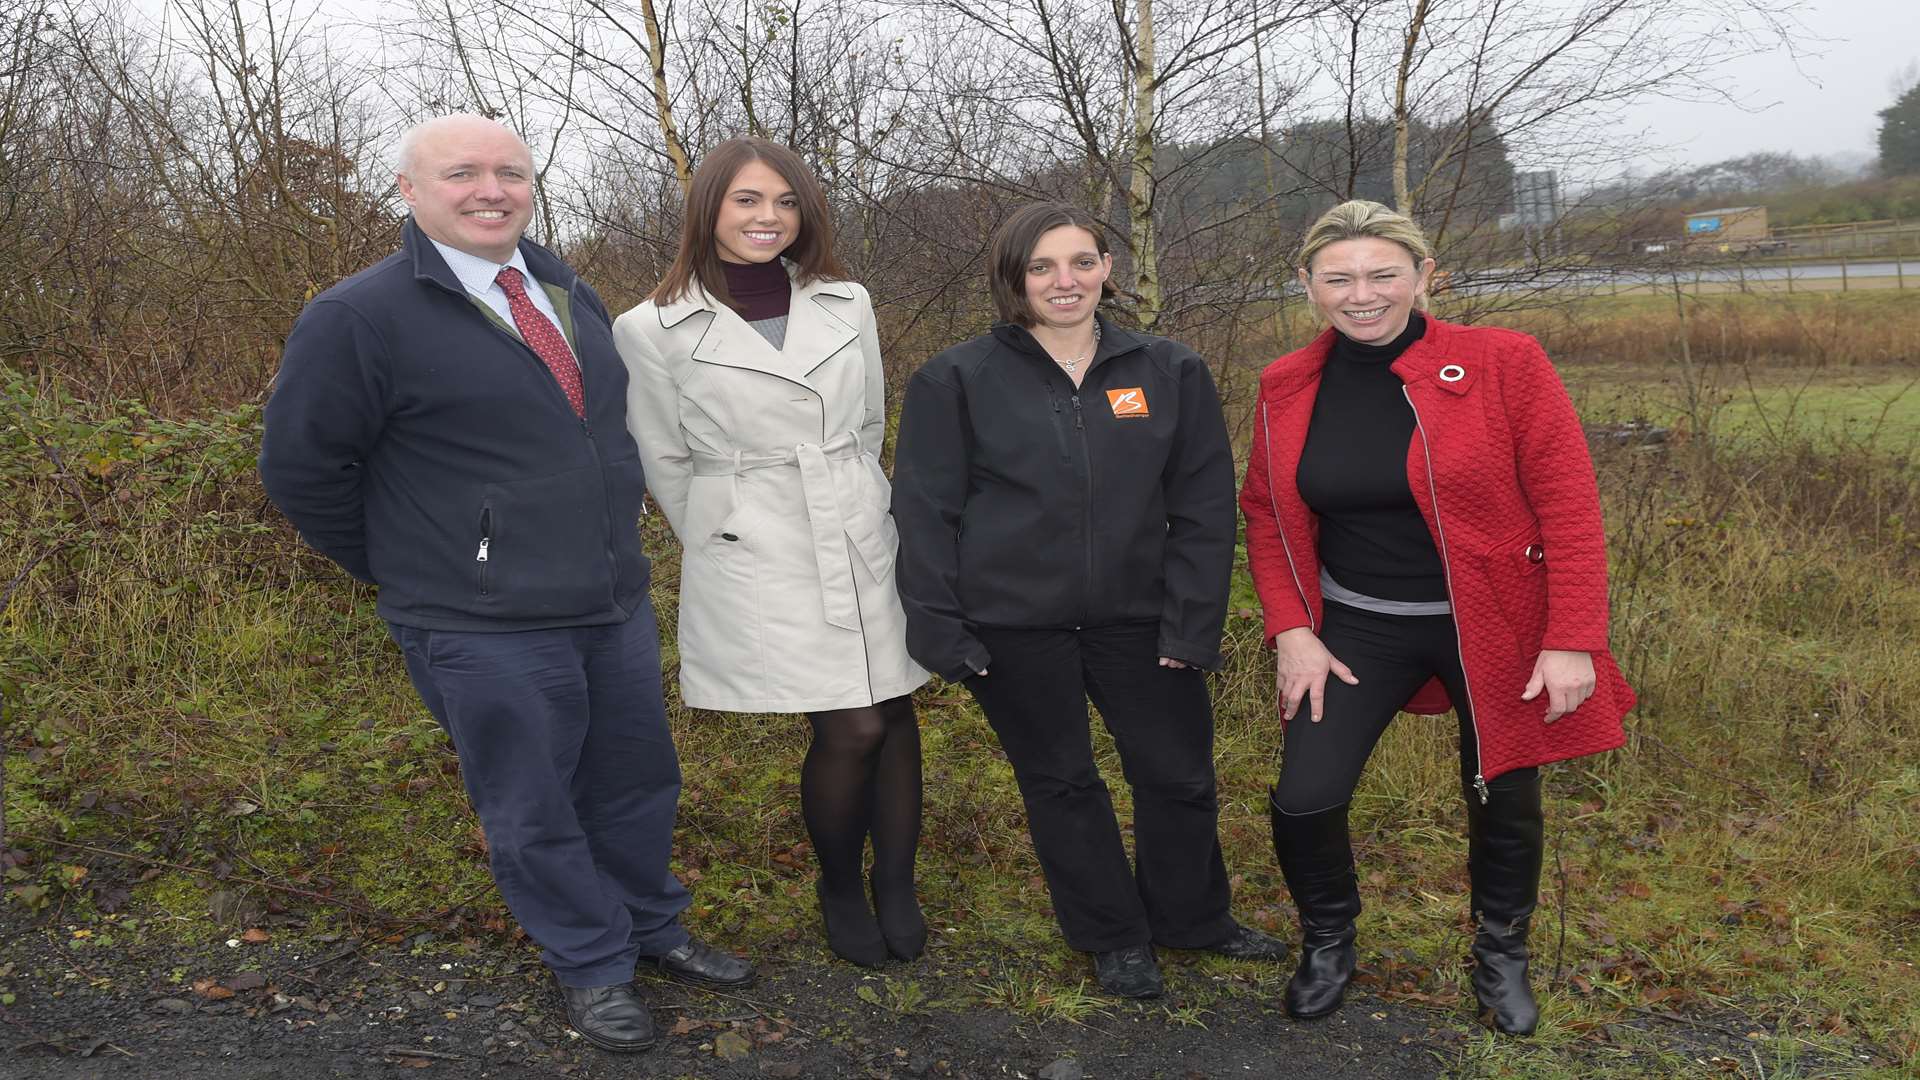 From Discovery Park, project manager Alan Carver and Lauren Wood, general manager for Betteshanger Park Lorraine Cheesmor and Discovery Park customer services manager Kimberley Anderson